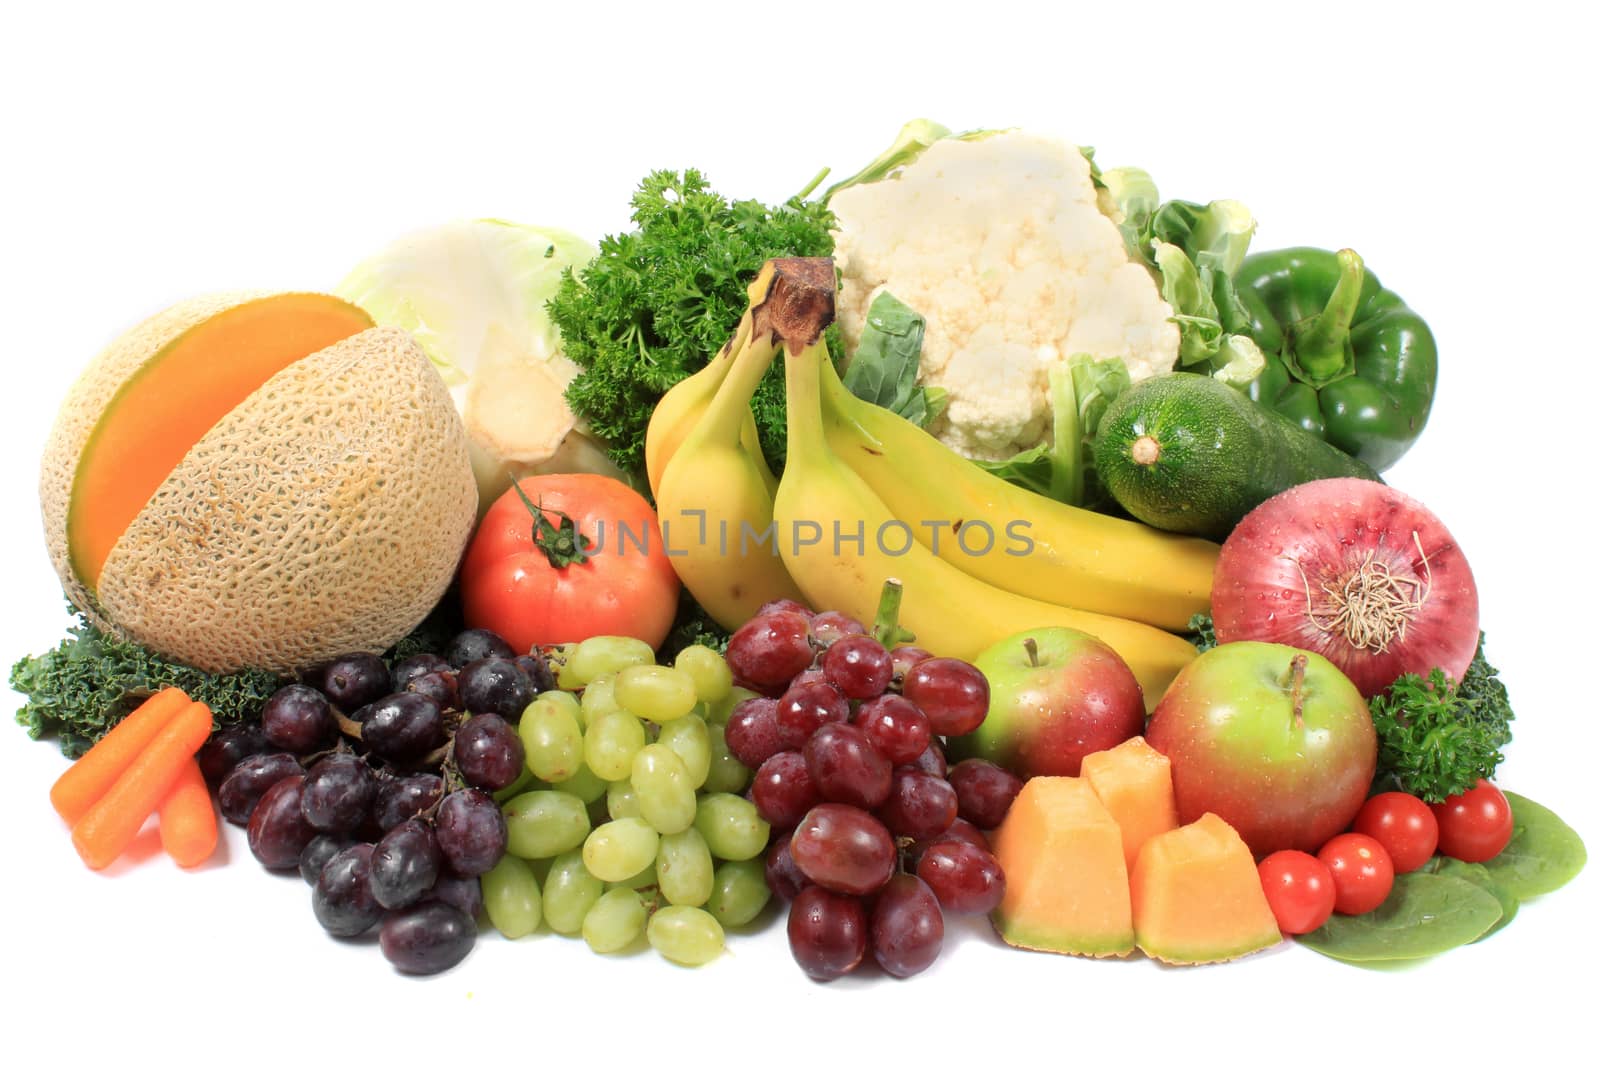 Group of colorful fruits and vegetables like grapes, apples, bananas, and cauliflower